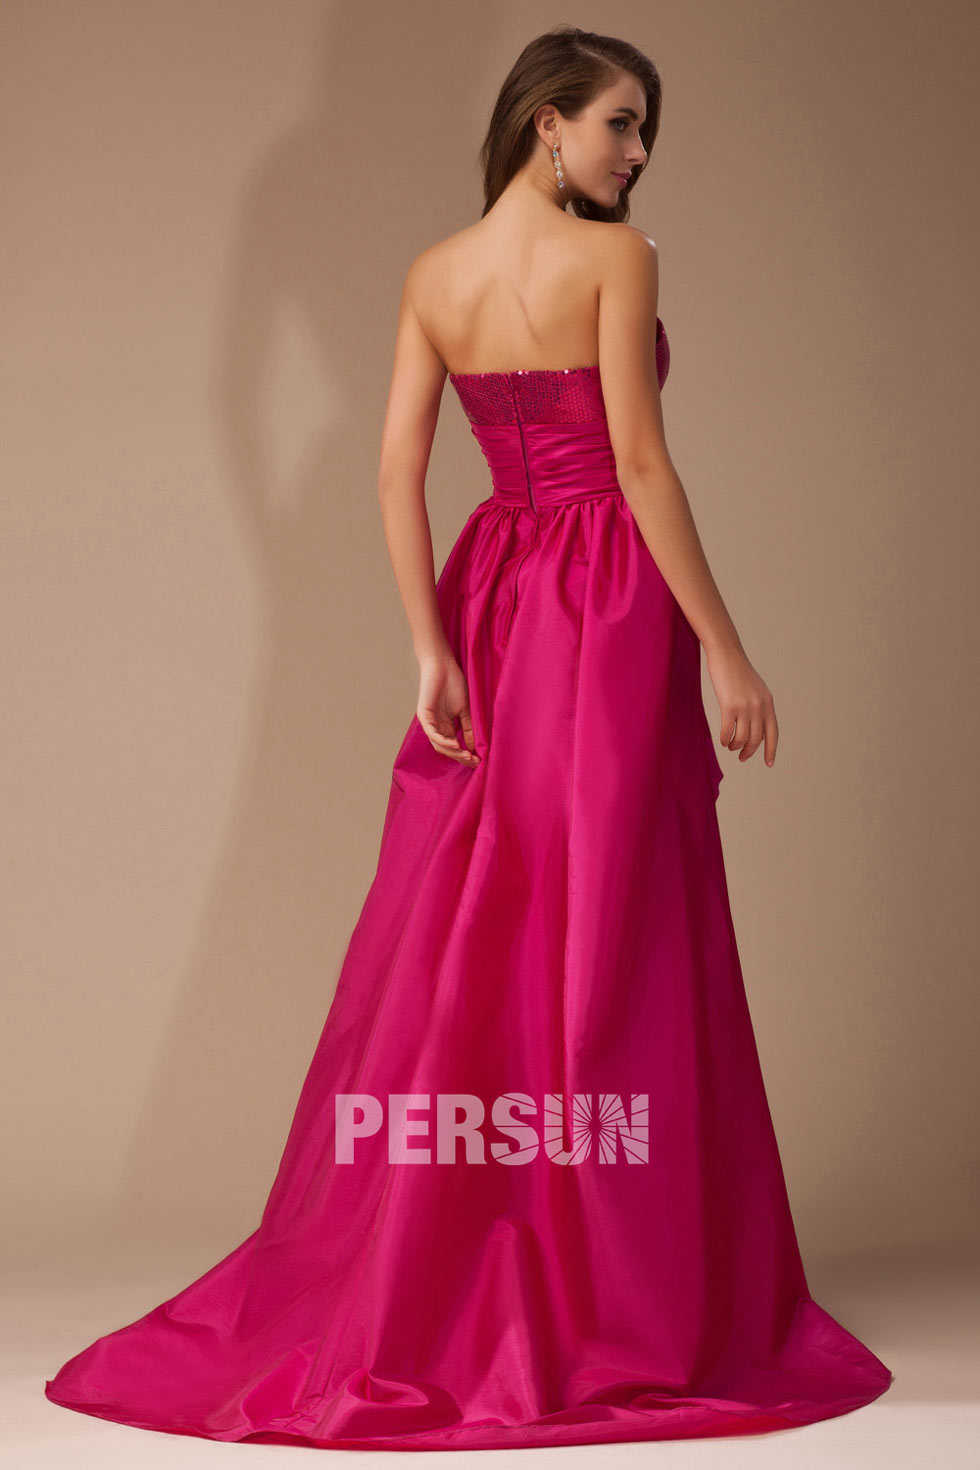 Pattern Empire Boat neck Strapless Ruched Sequins Ruched Taffeta High low Cocktail Dress